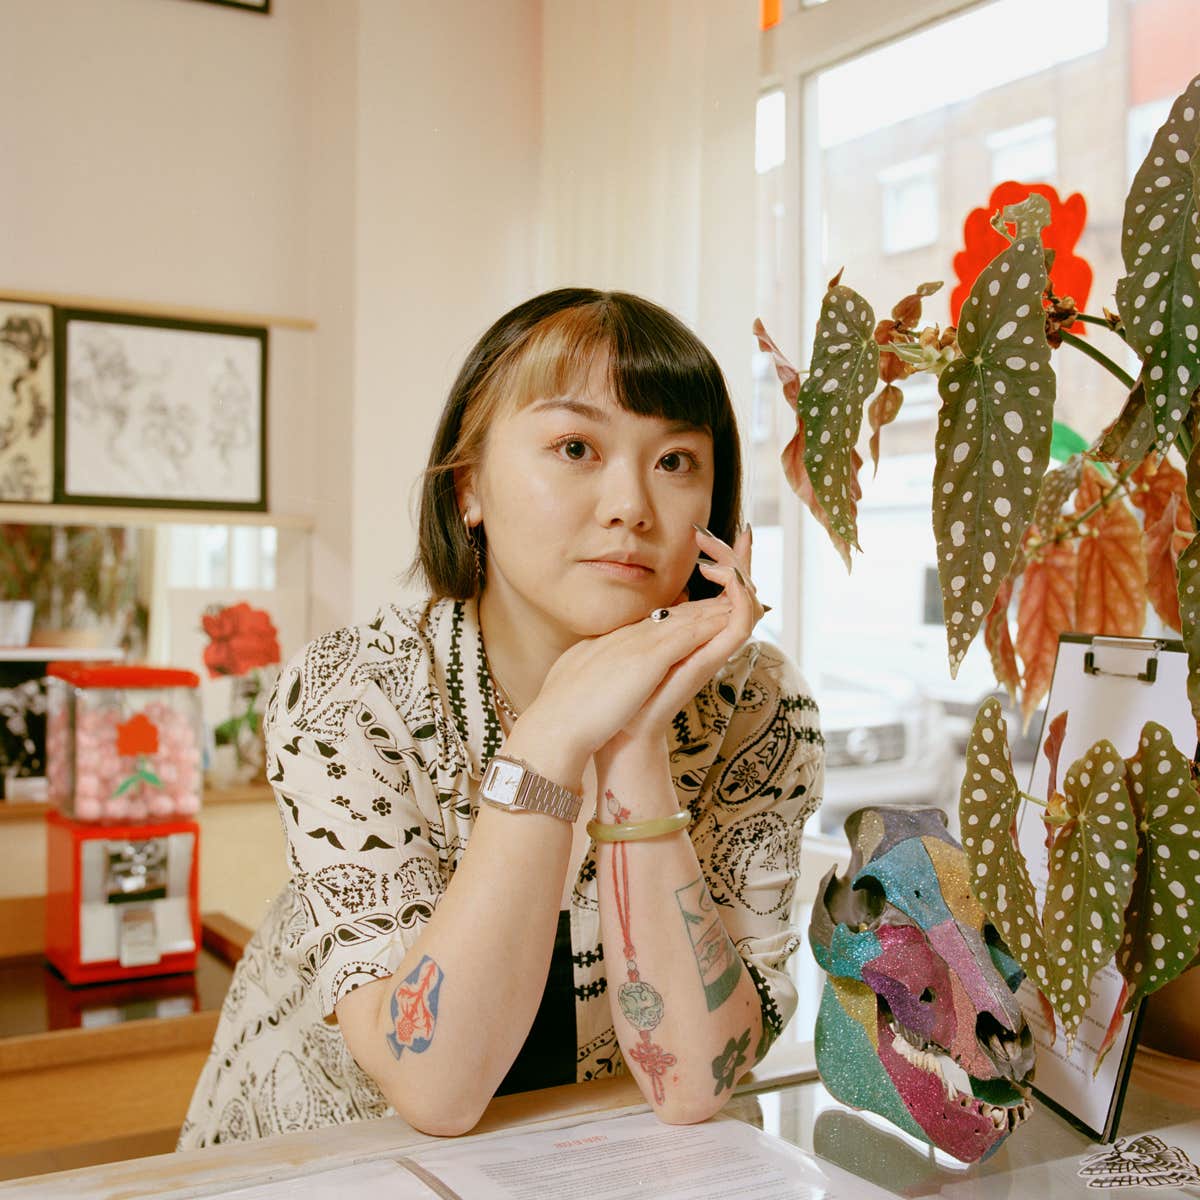 Using Tattoos To Connect With My Asian Culture